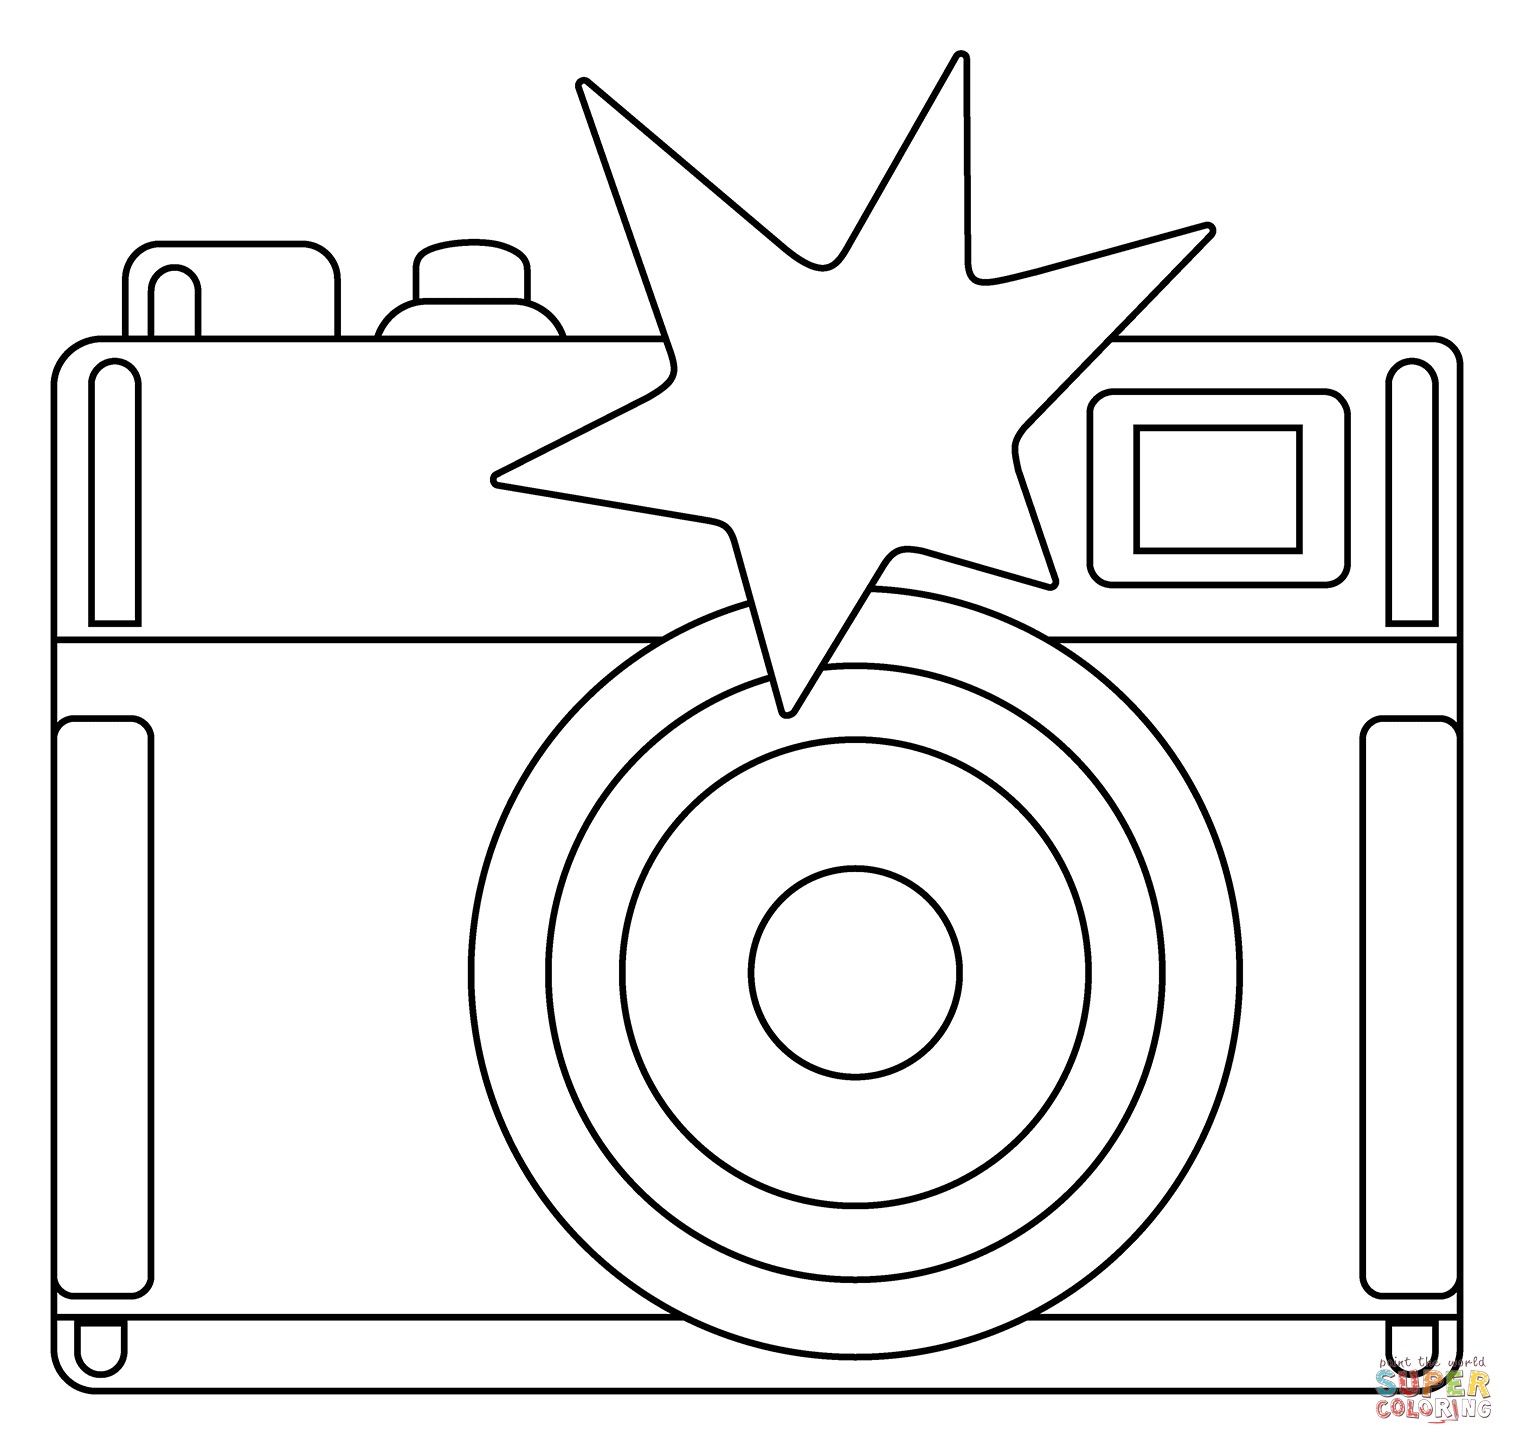 Camera with flash emoji coloring page free printable coloring pages